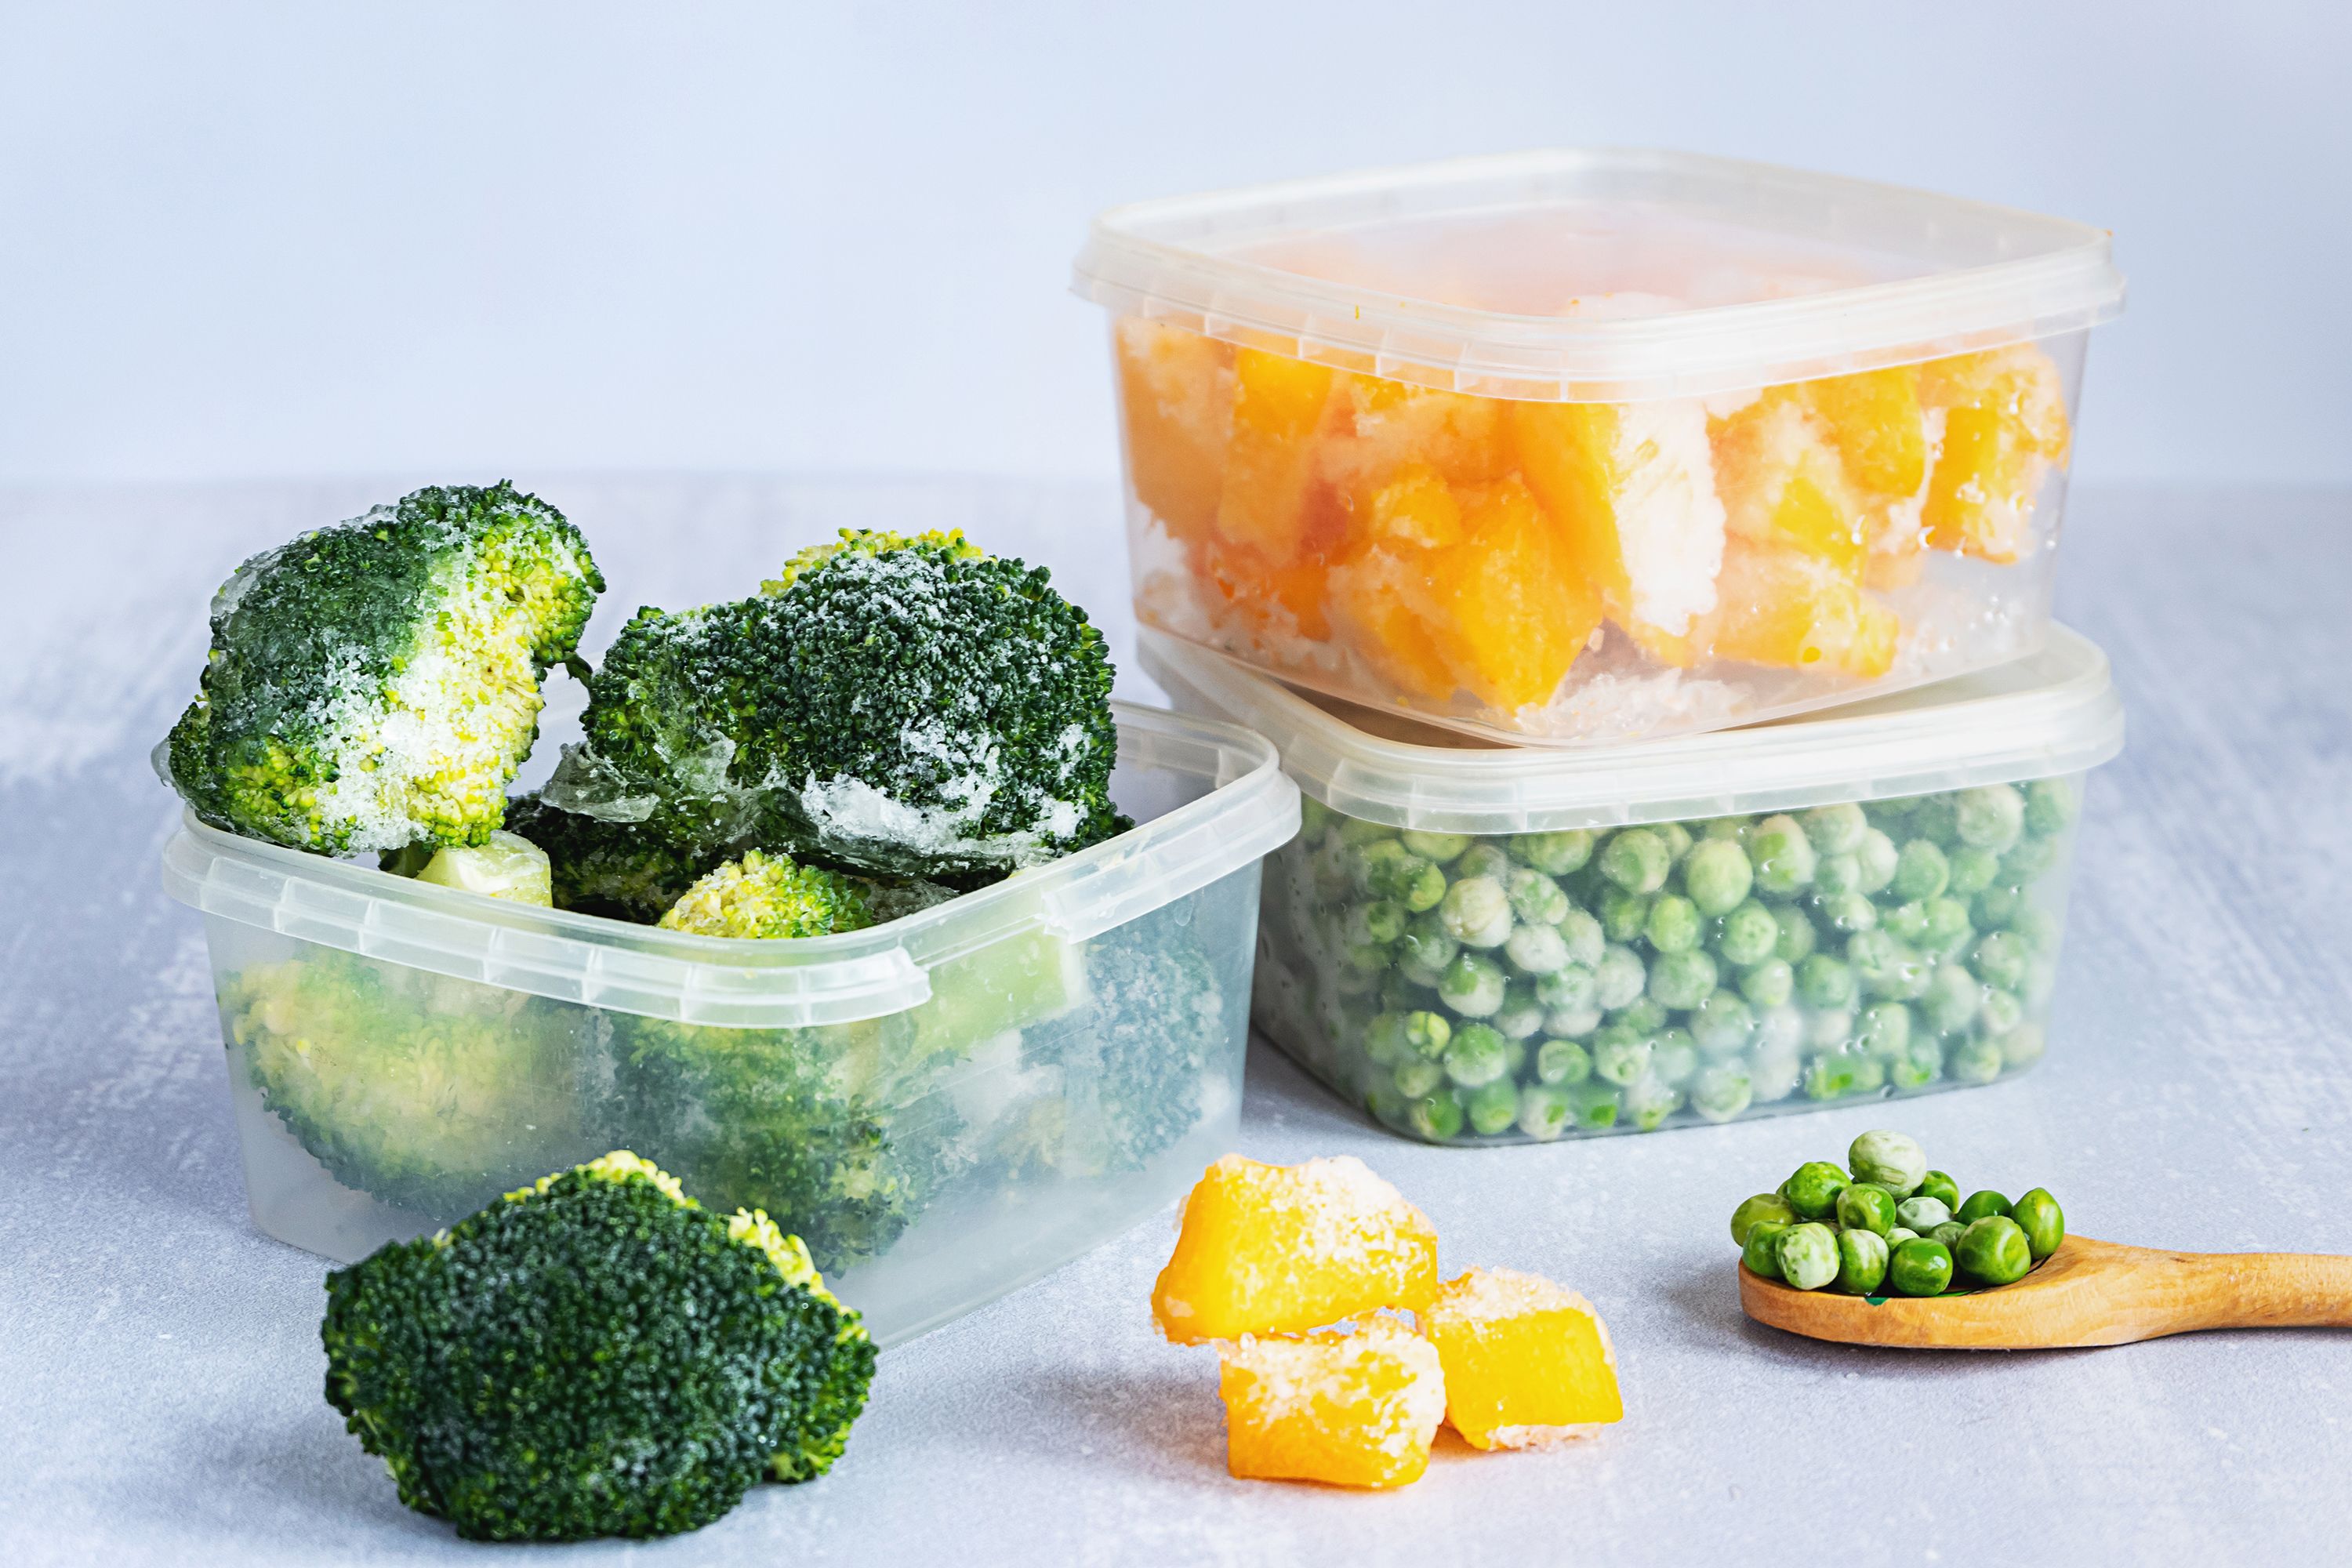 Canned and frozen foods can make up nutritious, affordable meals